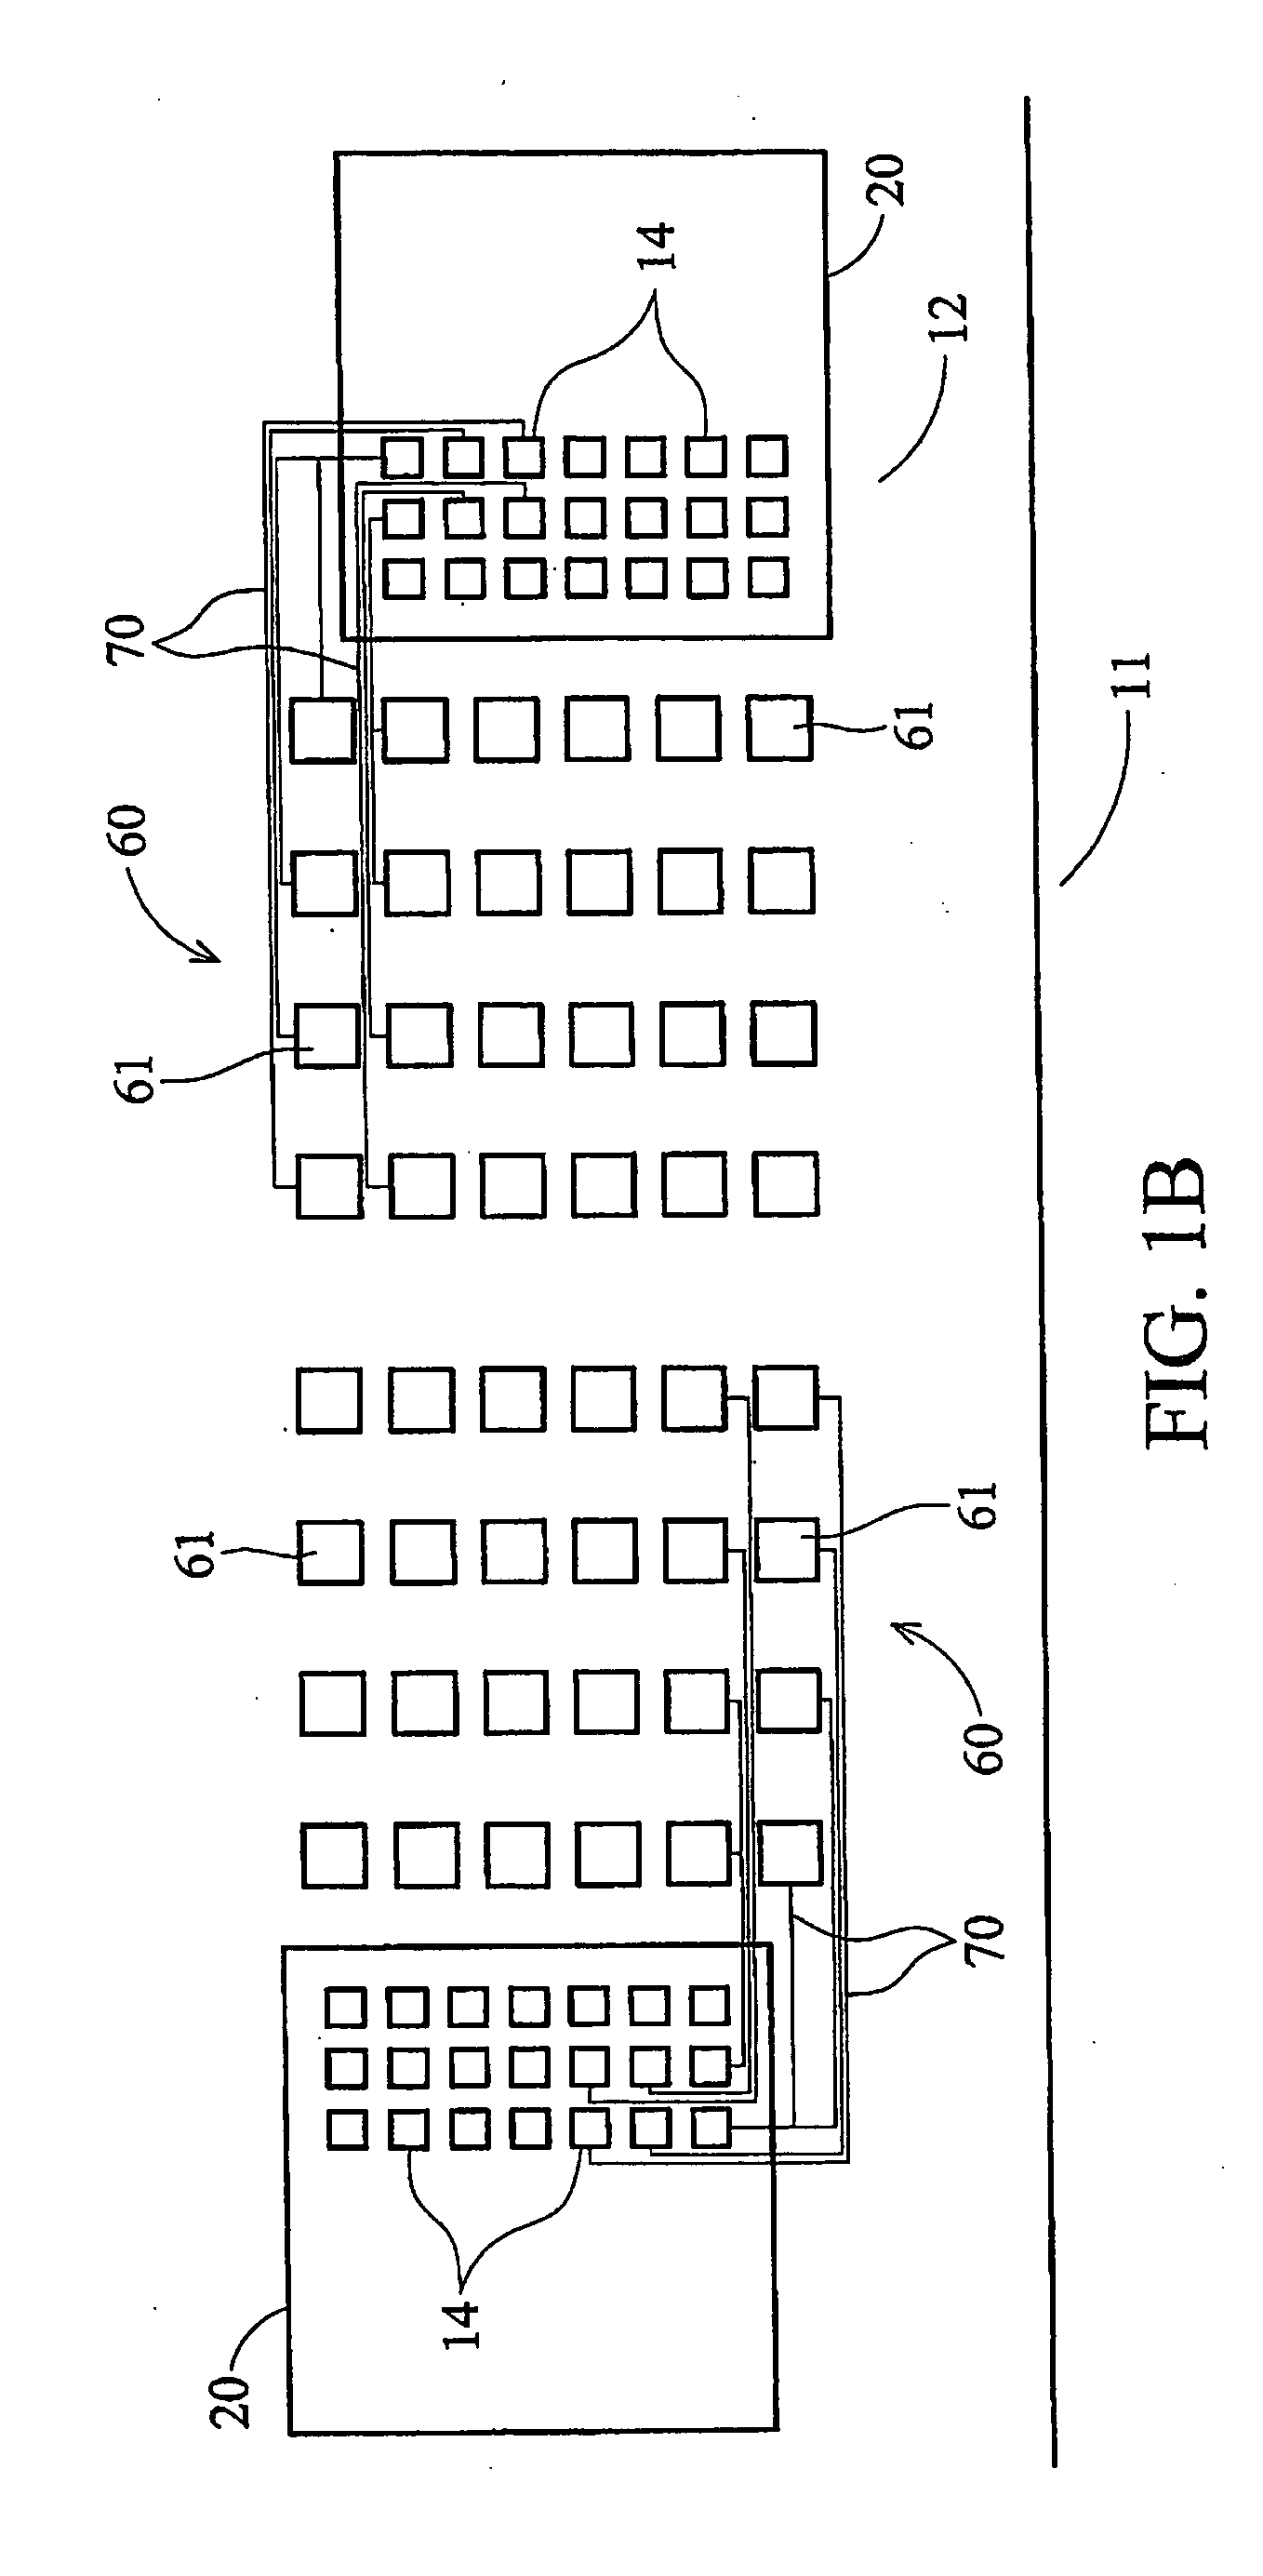 Test pad array for contact resistance measuring of ACF bonds on a liquid crystal display panel